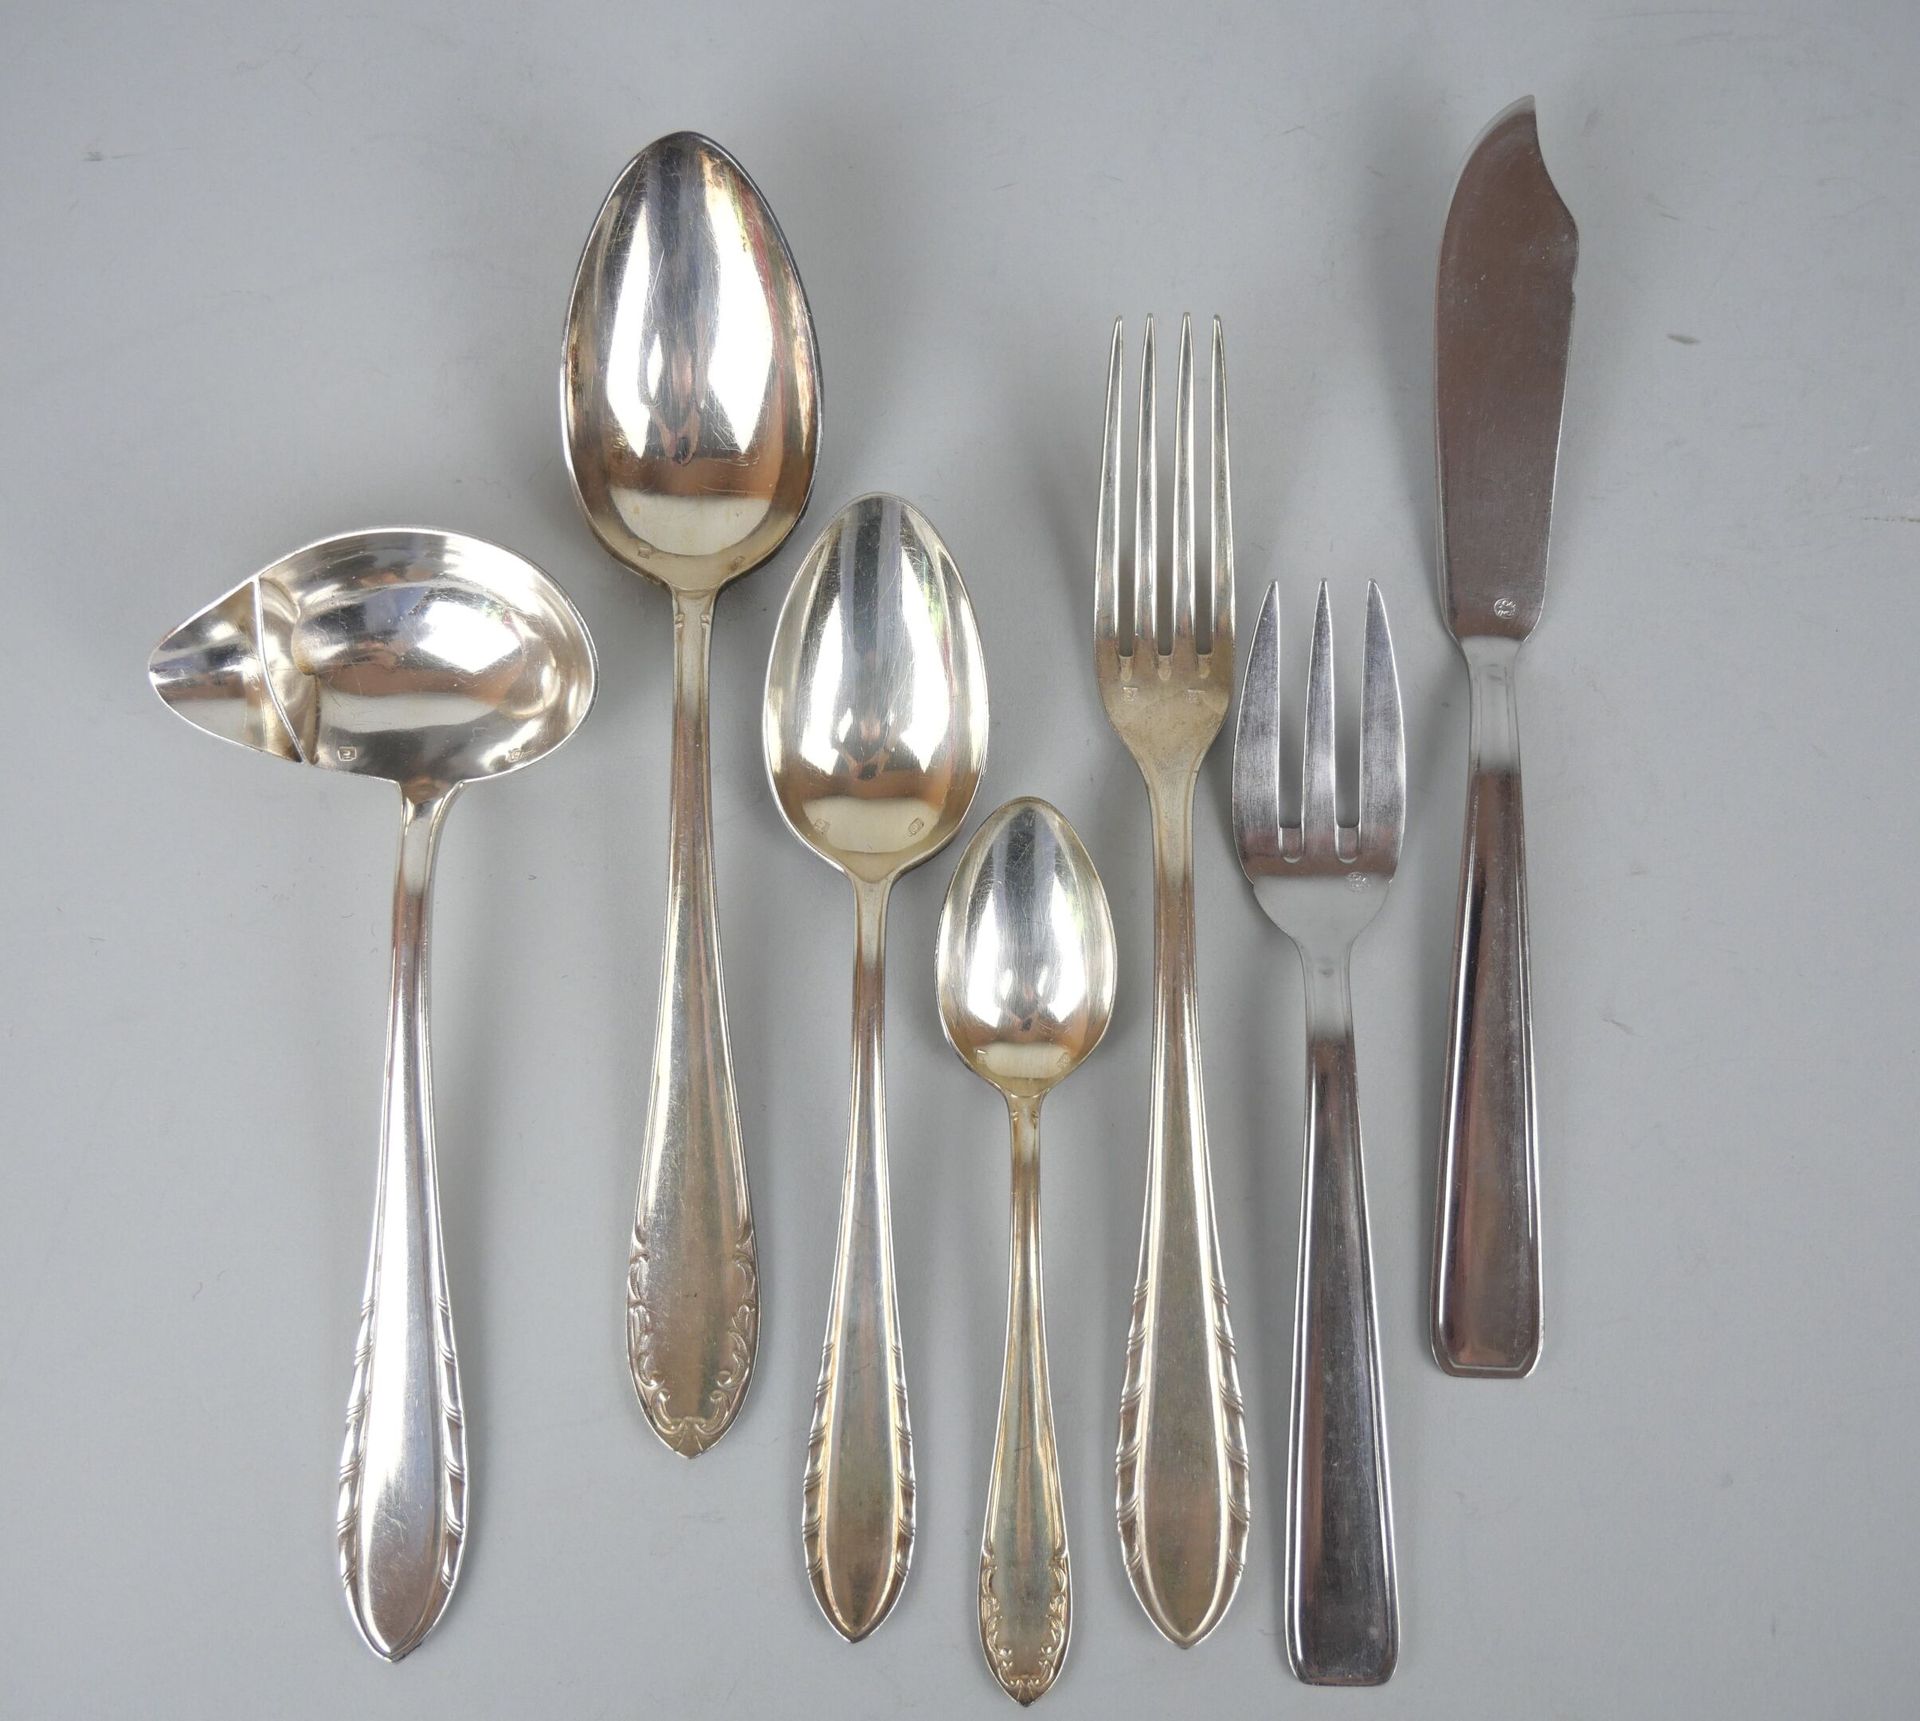 Null Parts of menagere out of silver plated metal including: 

5 large spoons wi&hellip;